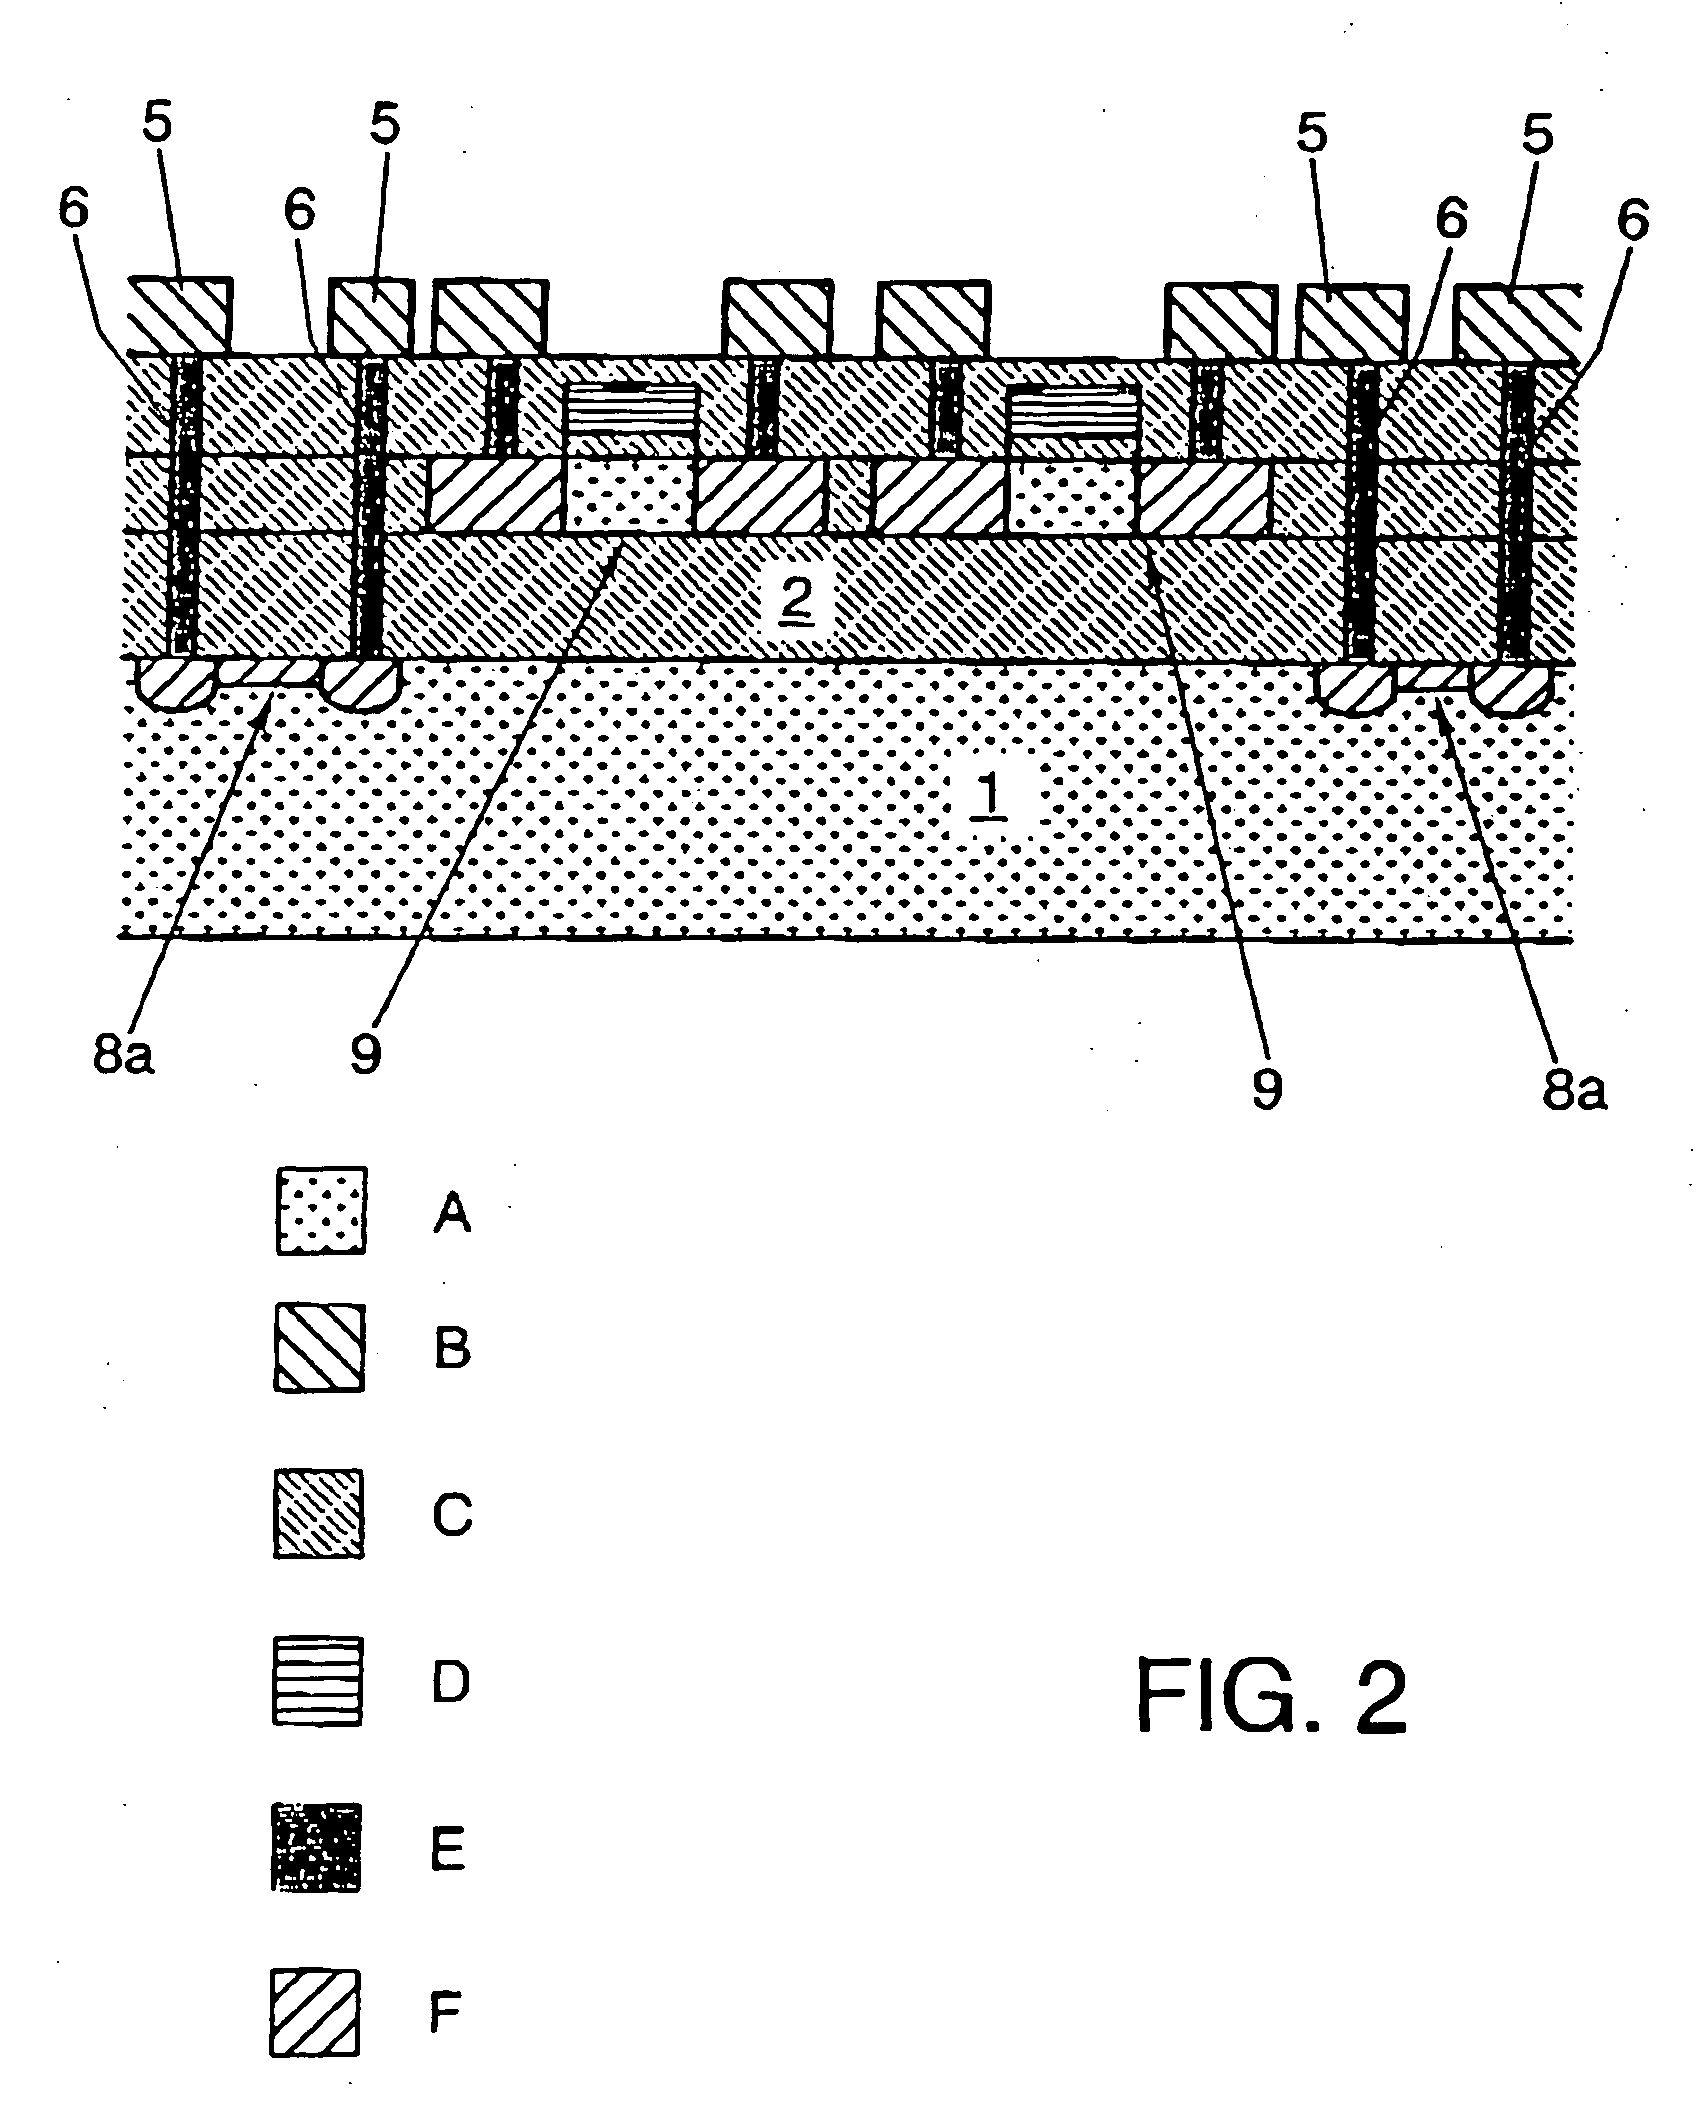 Semiconductor device comprising an integrated circuit